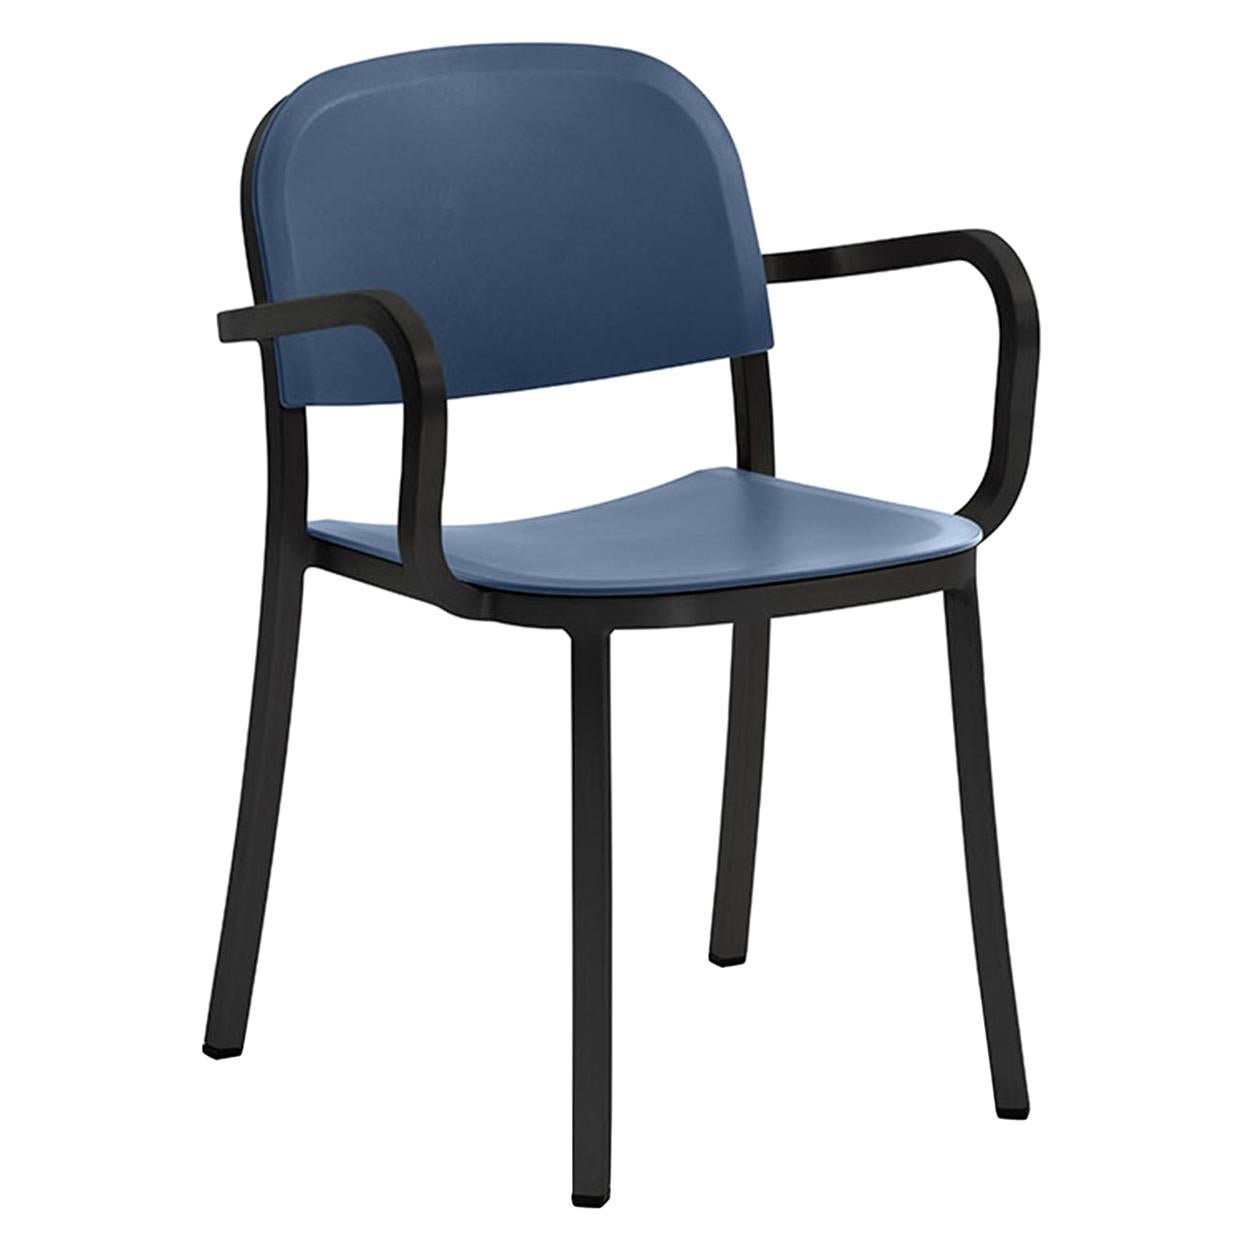 Emeco 1 Inch Armchair in Dark Powder-Coated Aluminum and Blue by Jasper Morrison